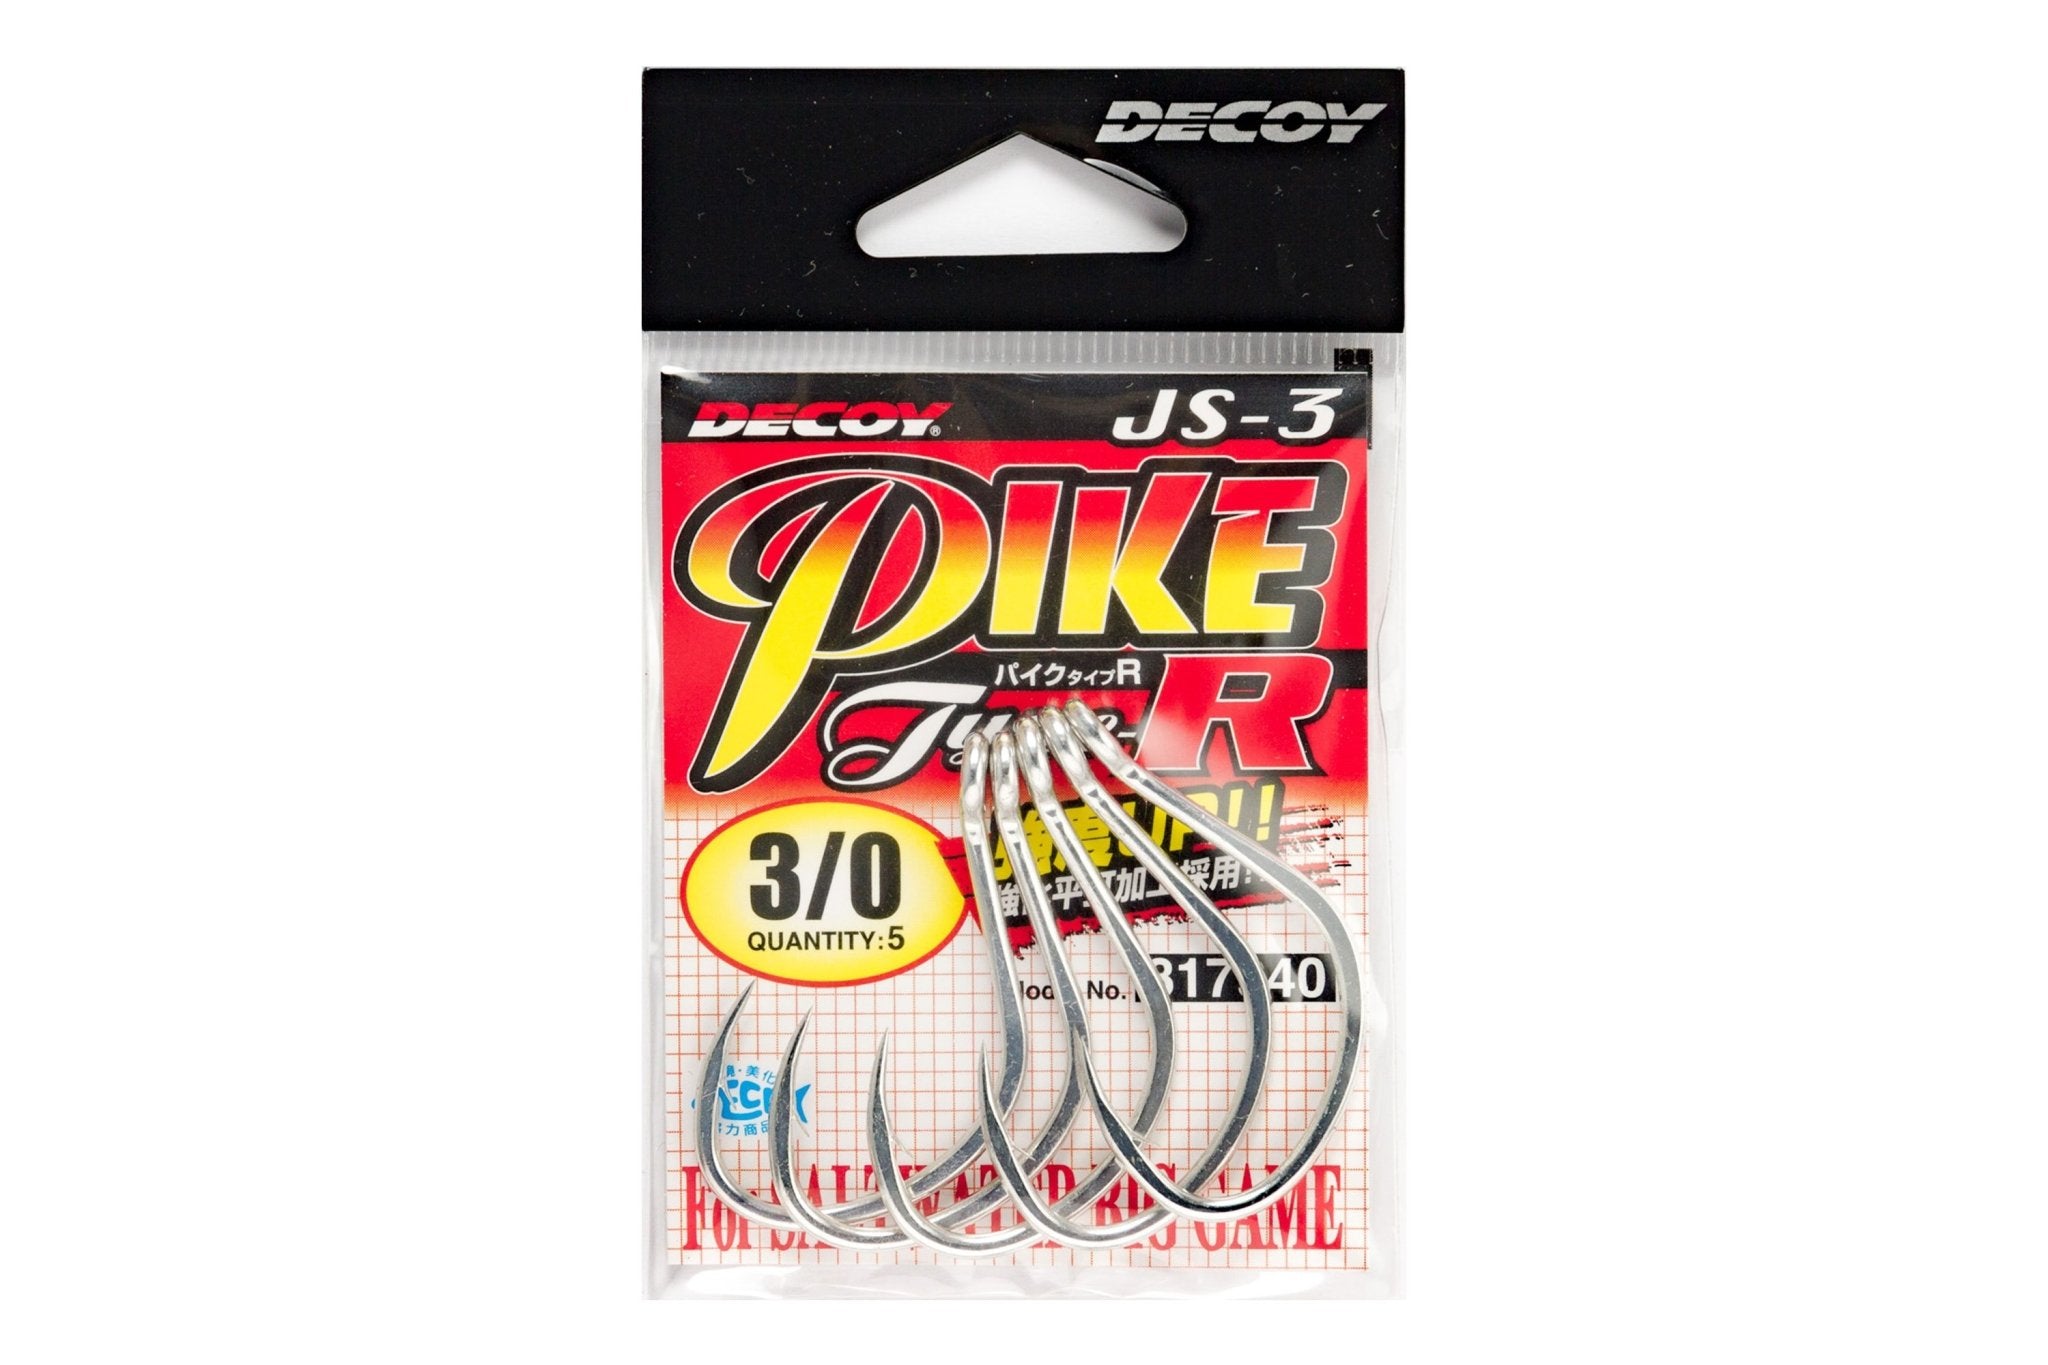 Owner Single Replacemnt Hook, Size 3/0 3/0 • Price »